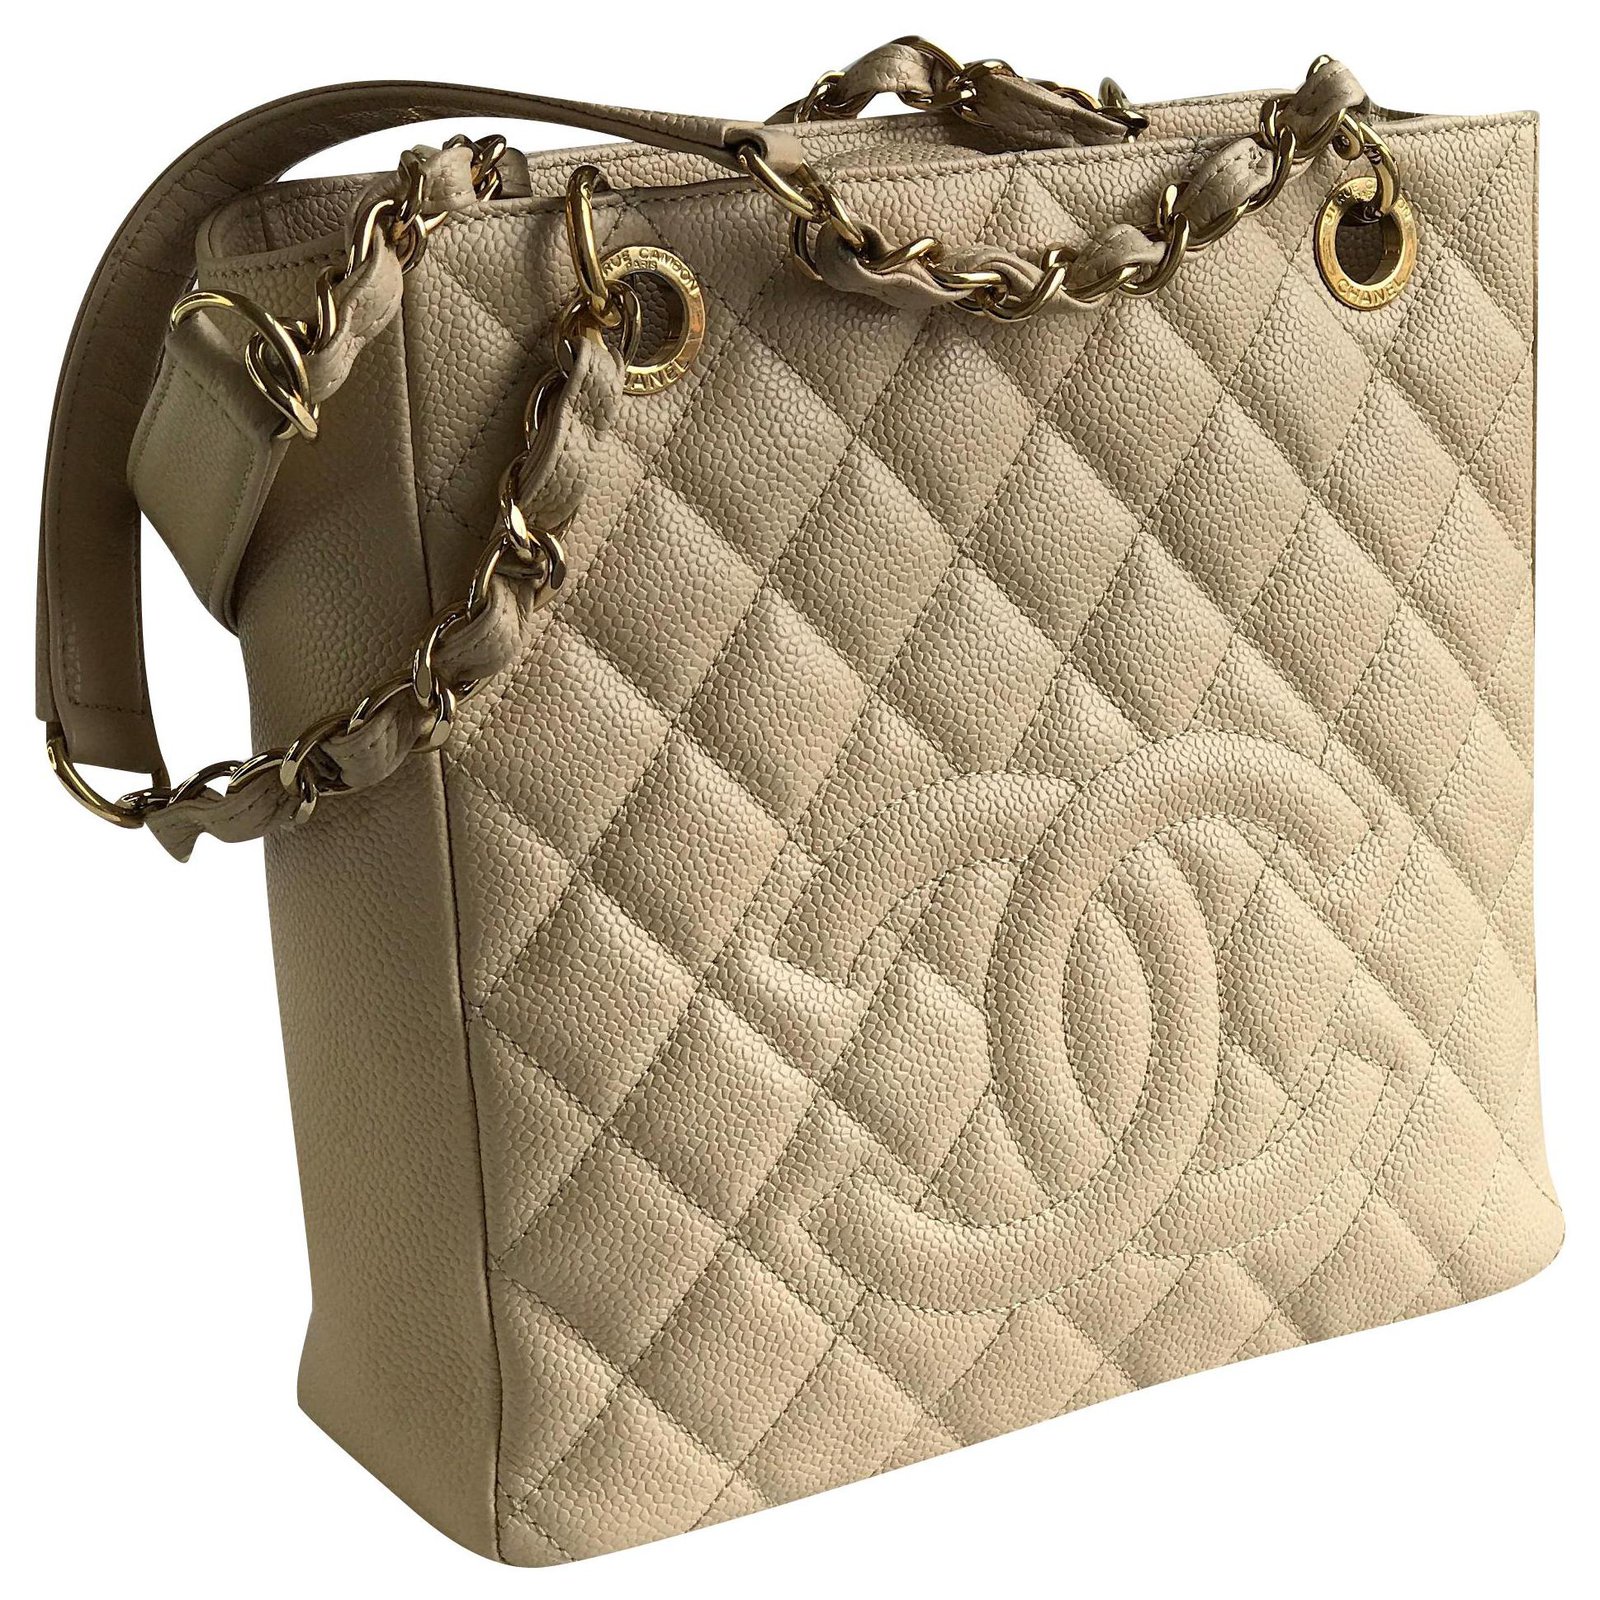 Chanel Petite Shopping Tote PST: Chic Glamour